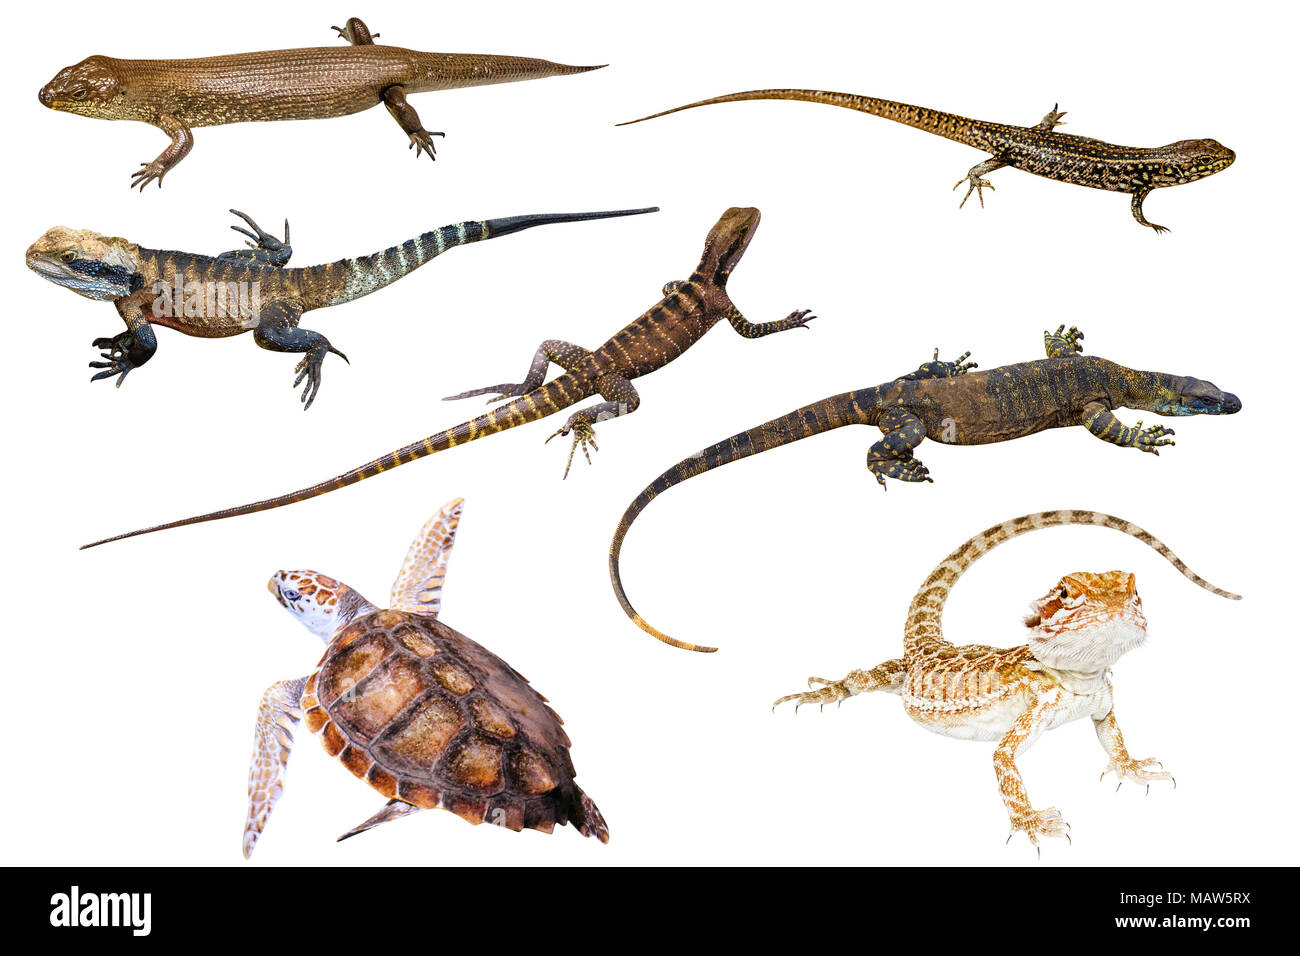 Collage of Australian reptiles, isolated on white background. King's skink,  Eastern Water Skink, Water Dragon male and female, Komodo dragon, Green Sea  Turtle and Pogona Vitticeps on white background Stock Photo -